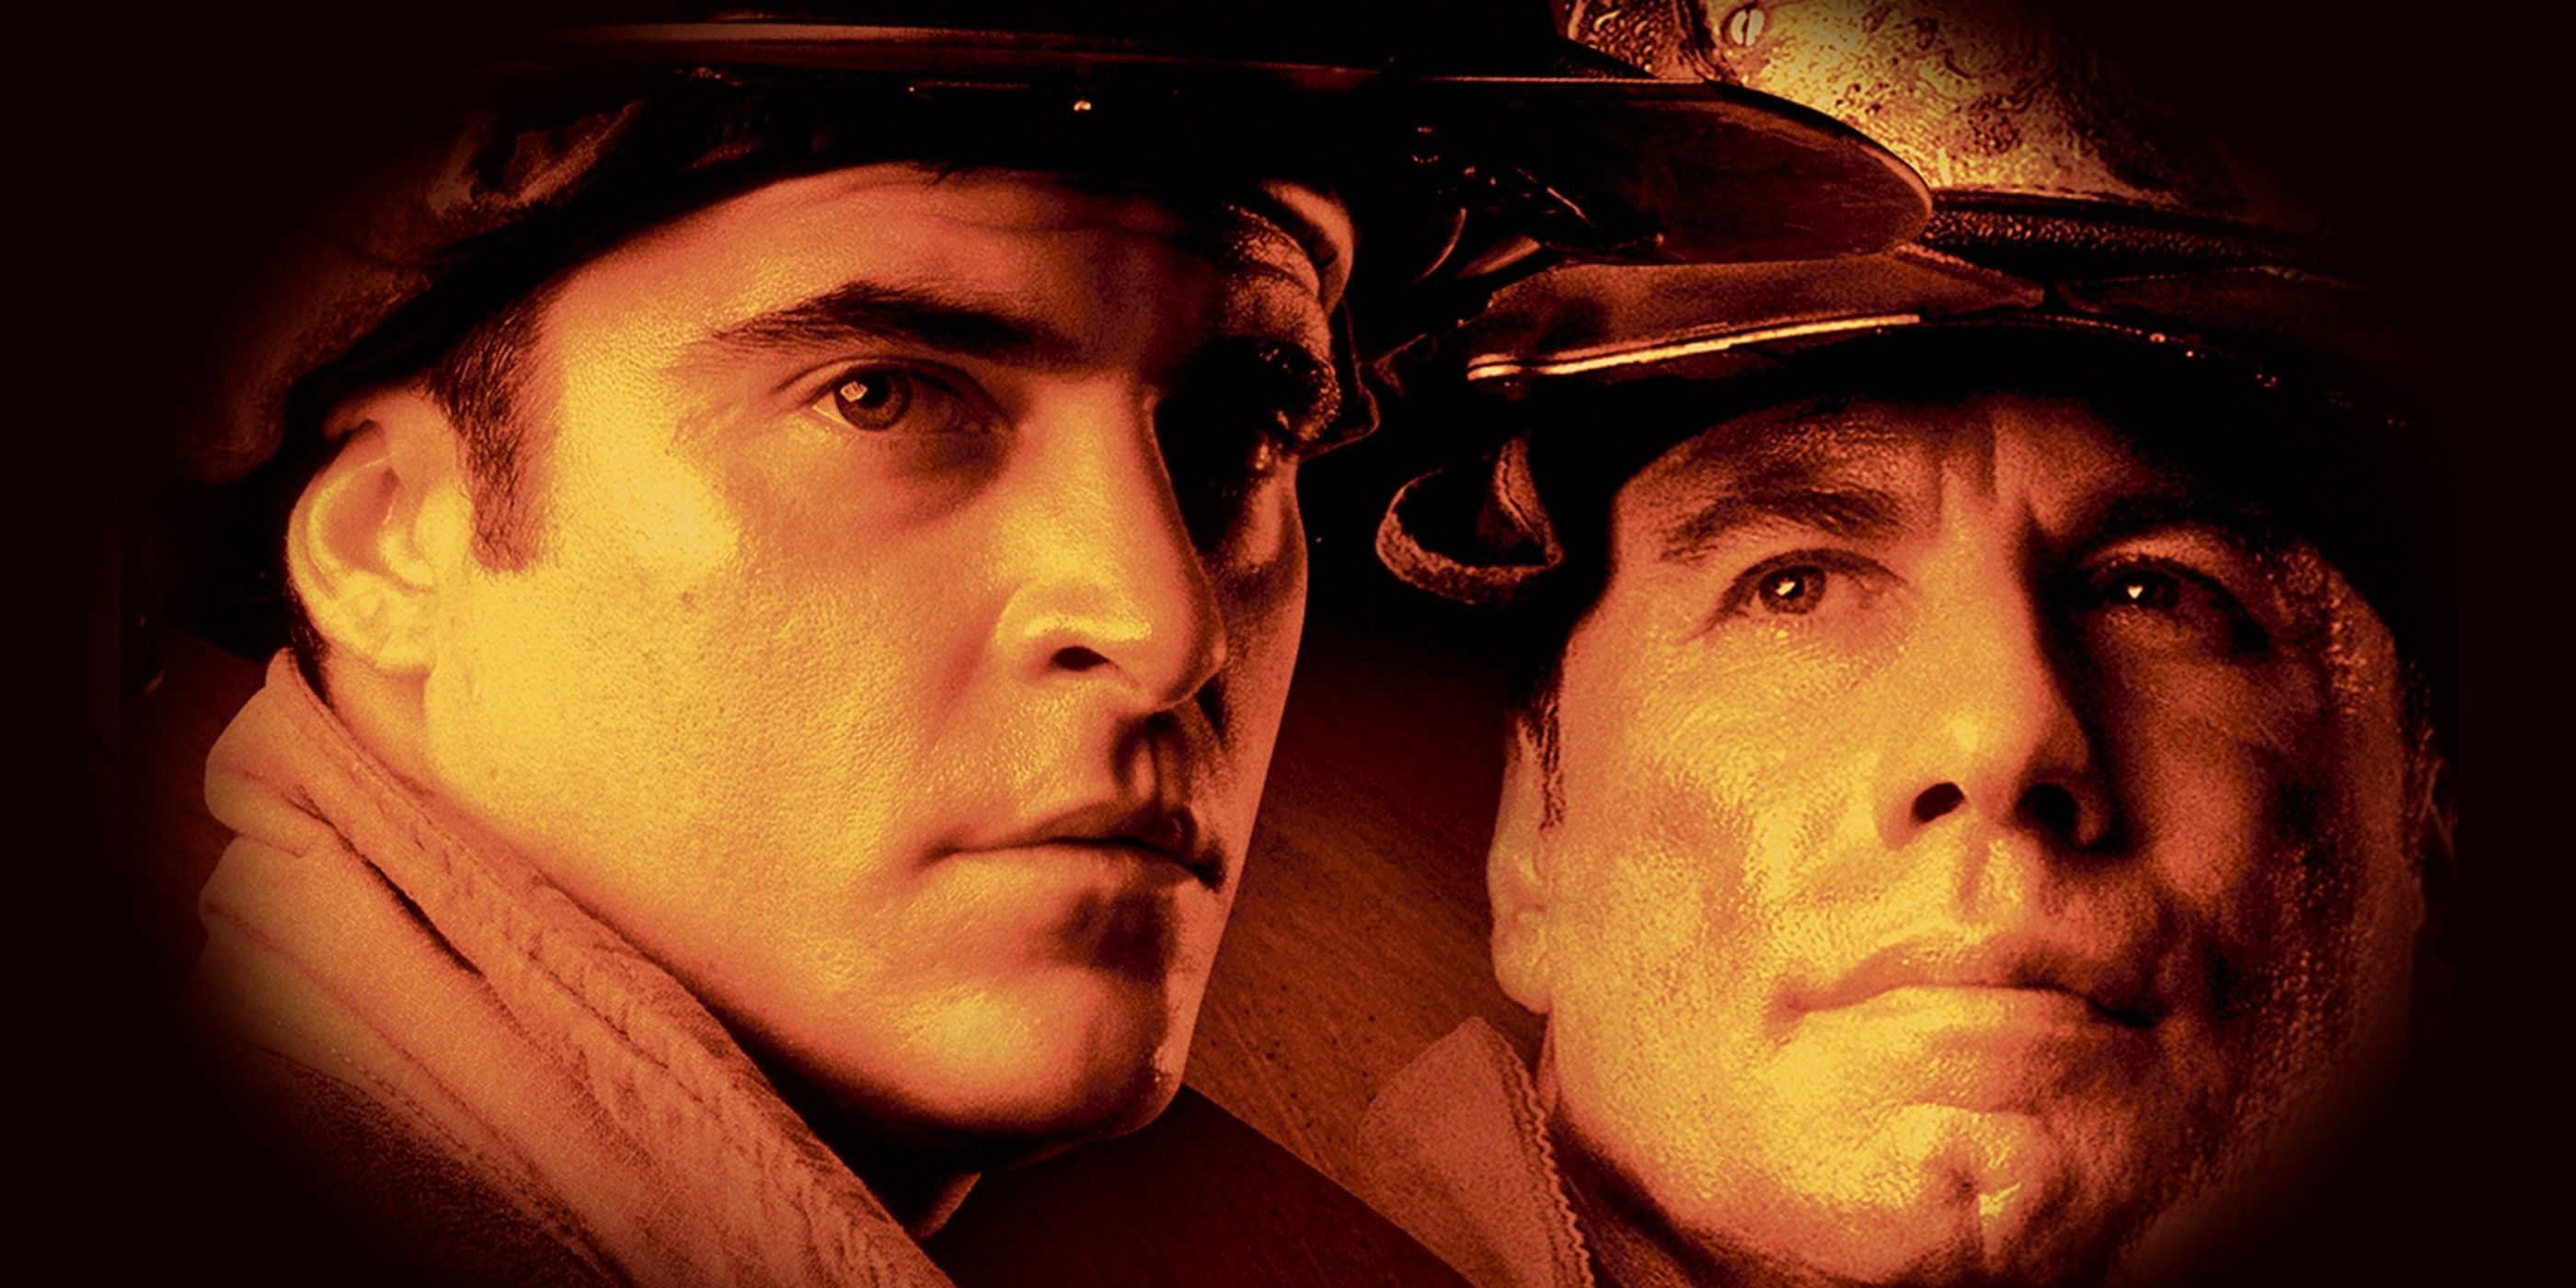 Joaquin Phoenix and John Travolta as firefighters looking off camera in Ladder 49 poster